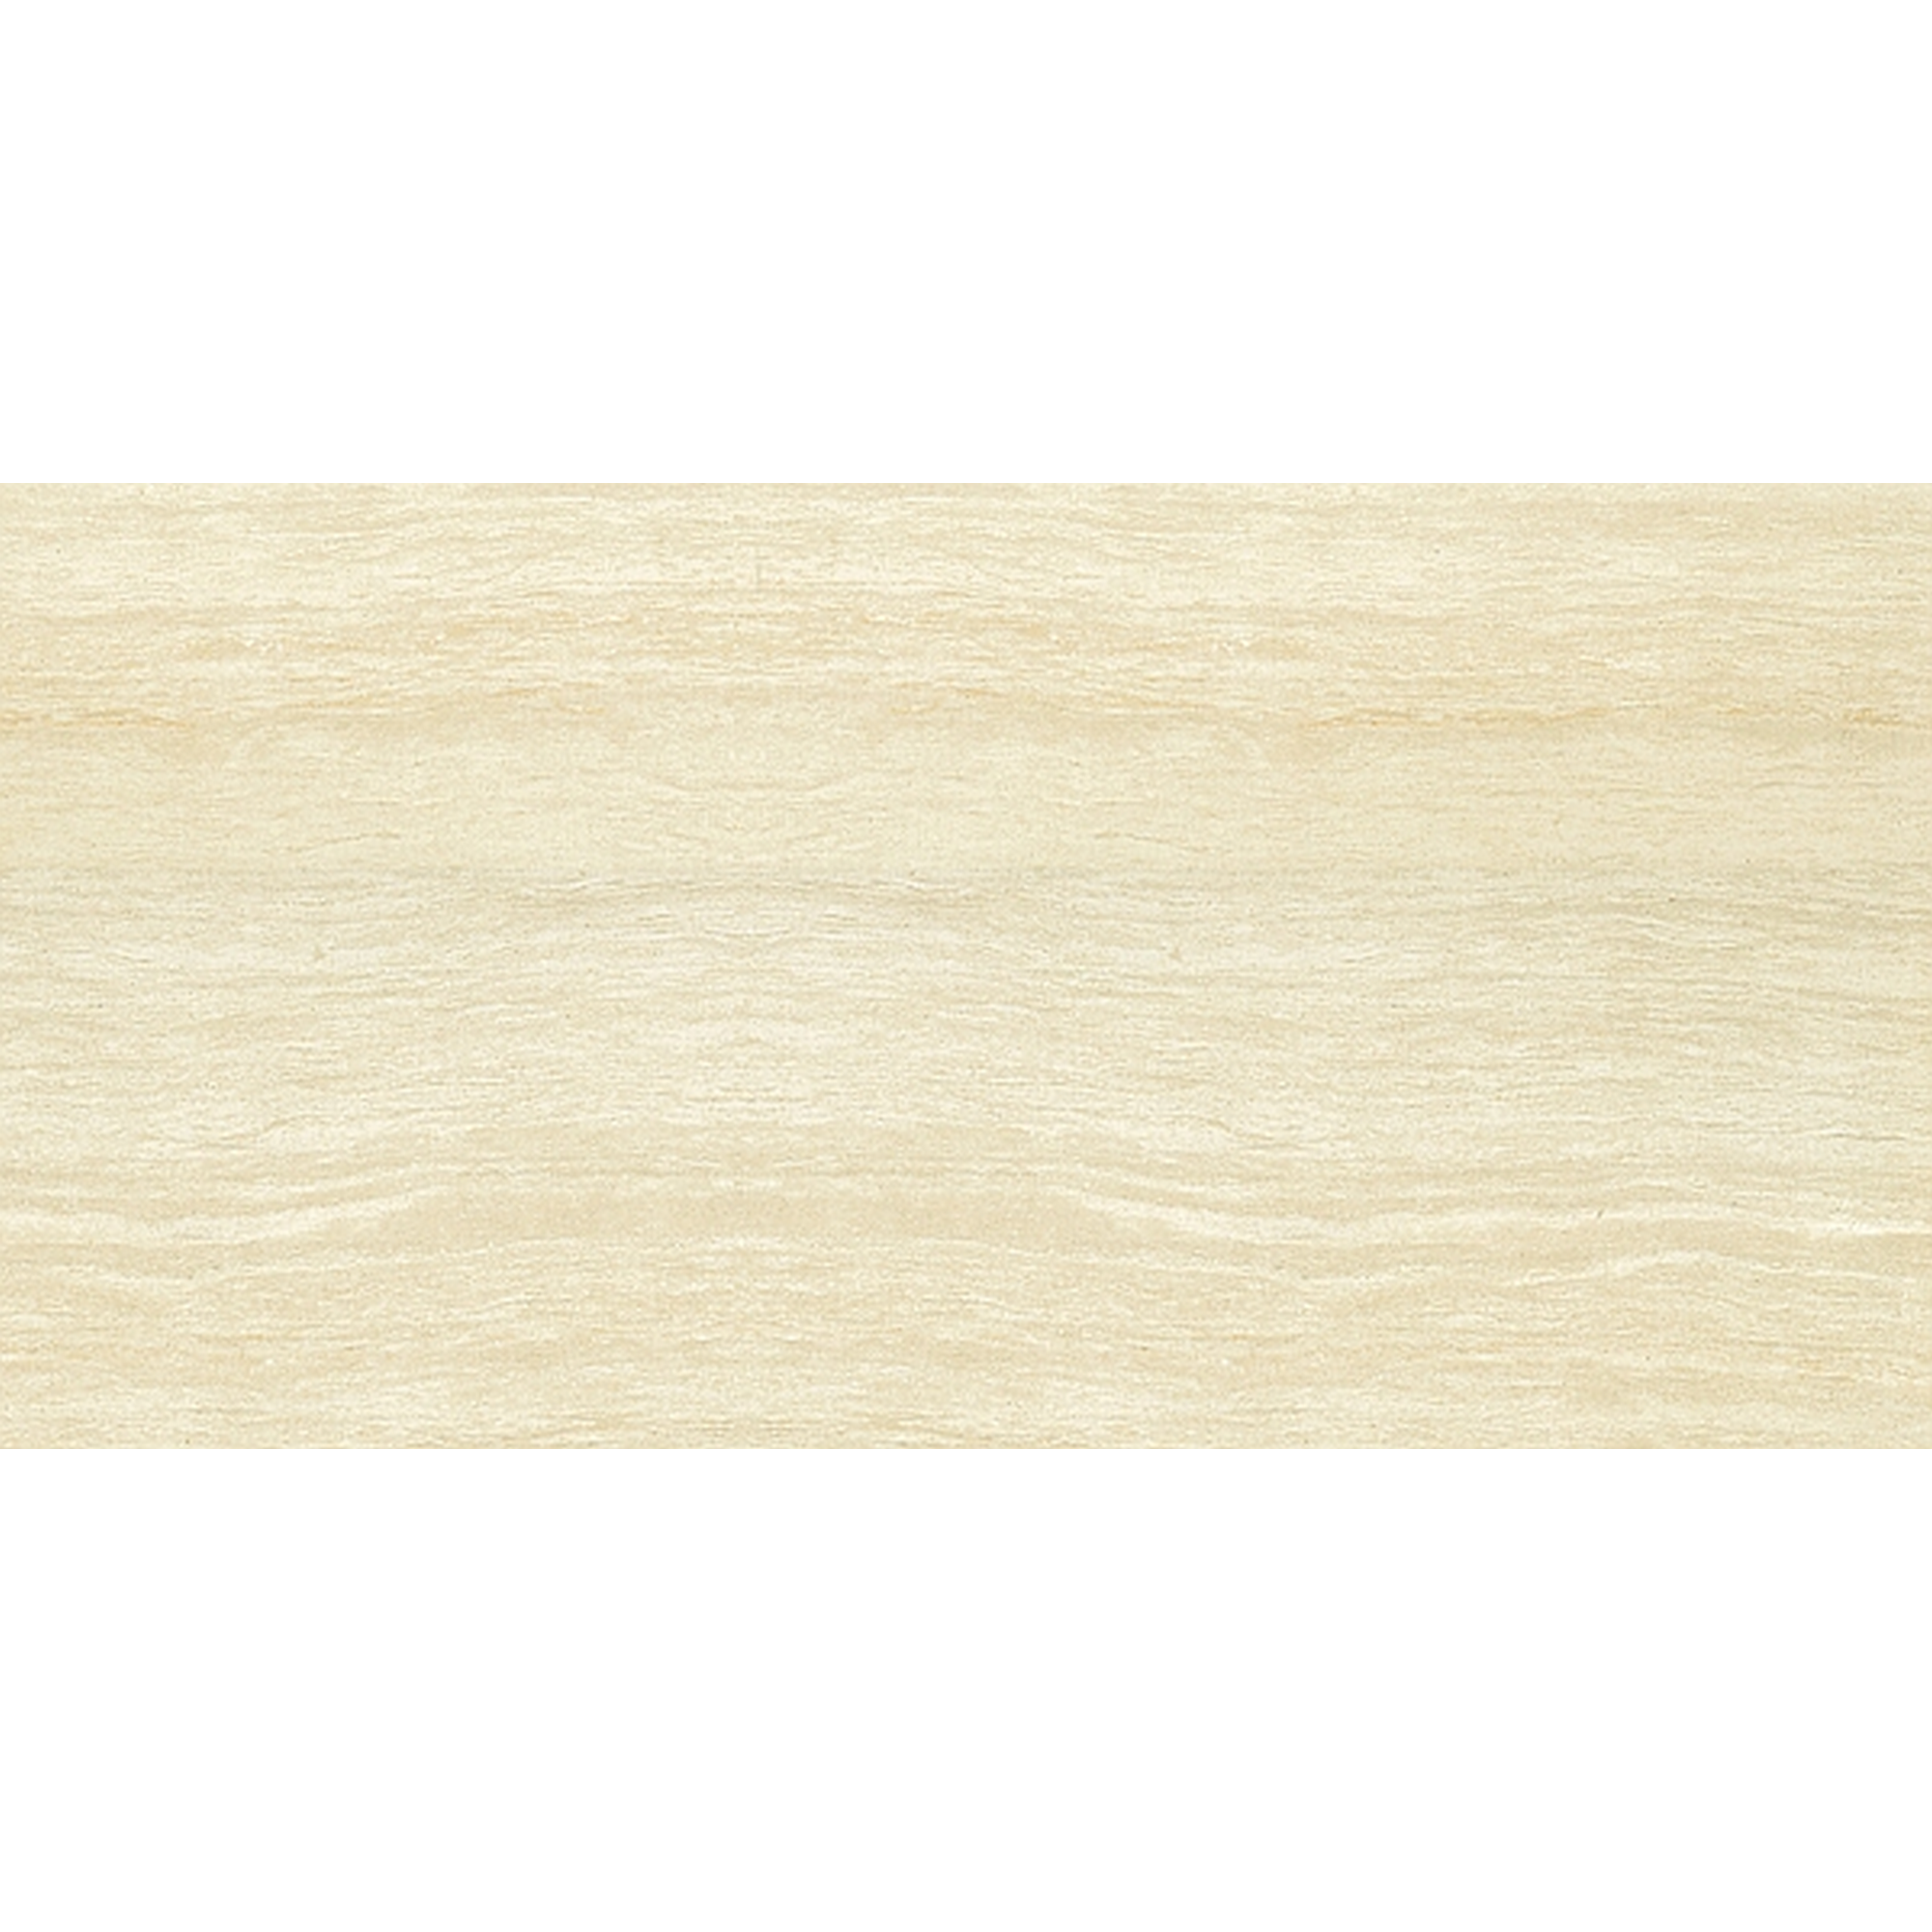 Bodenfliese Travertin beige 30 x 60 cm + product picture